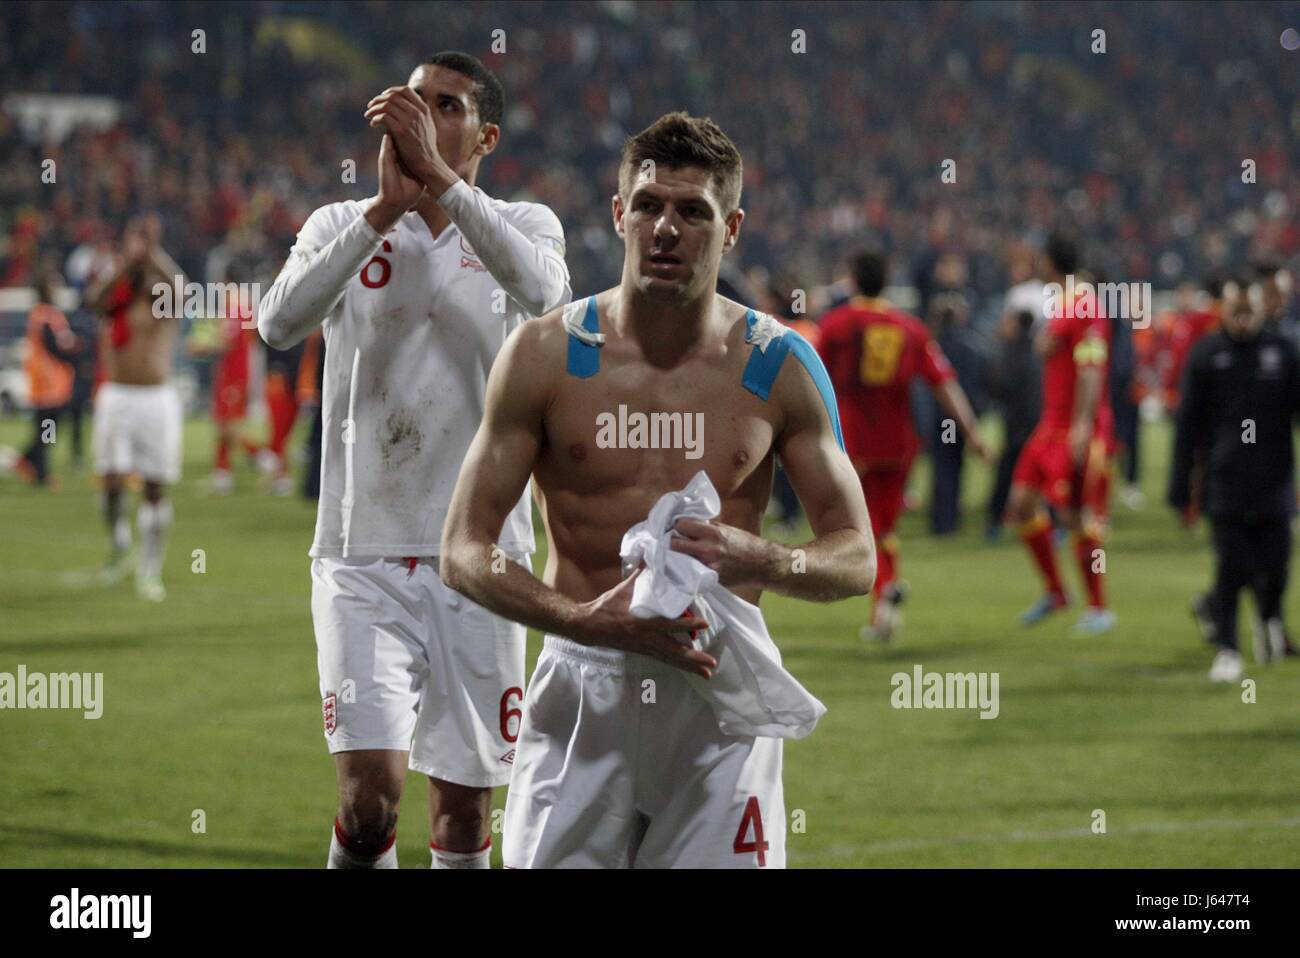 STEVEN GERRARD AFTER THE FINAL WHISTLE, MONTENEGRO V ENGLAND, MONTENEGRO V ENGLAND,GROUP H FIFA WORLD CUP 2014 QUALIFIER, 2013 Stock Photo